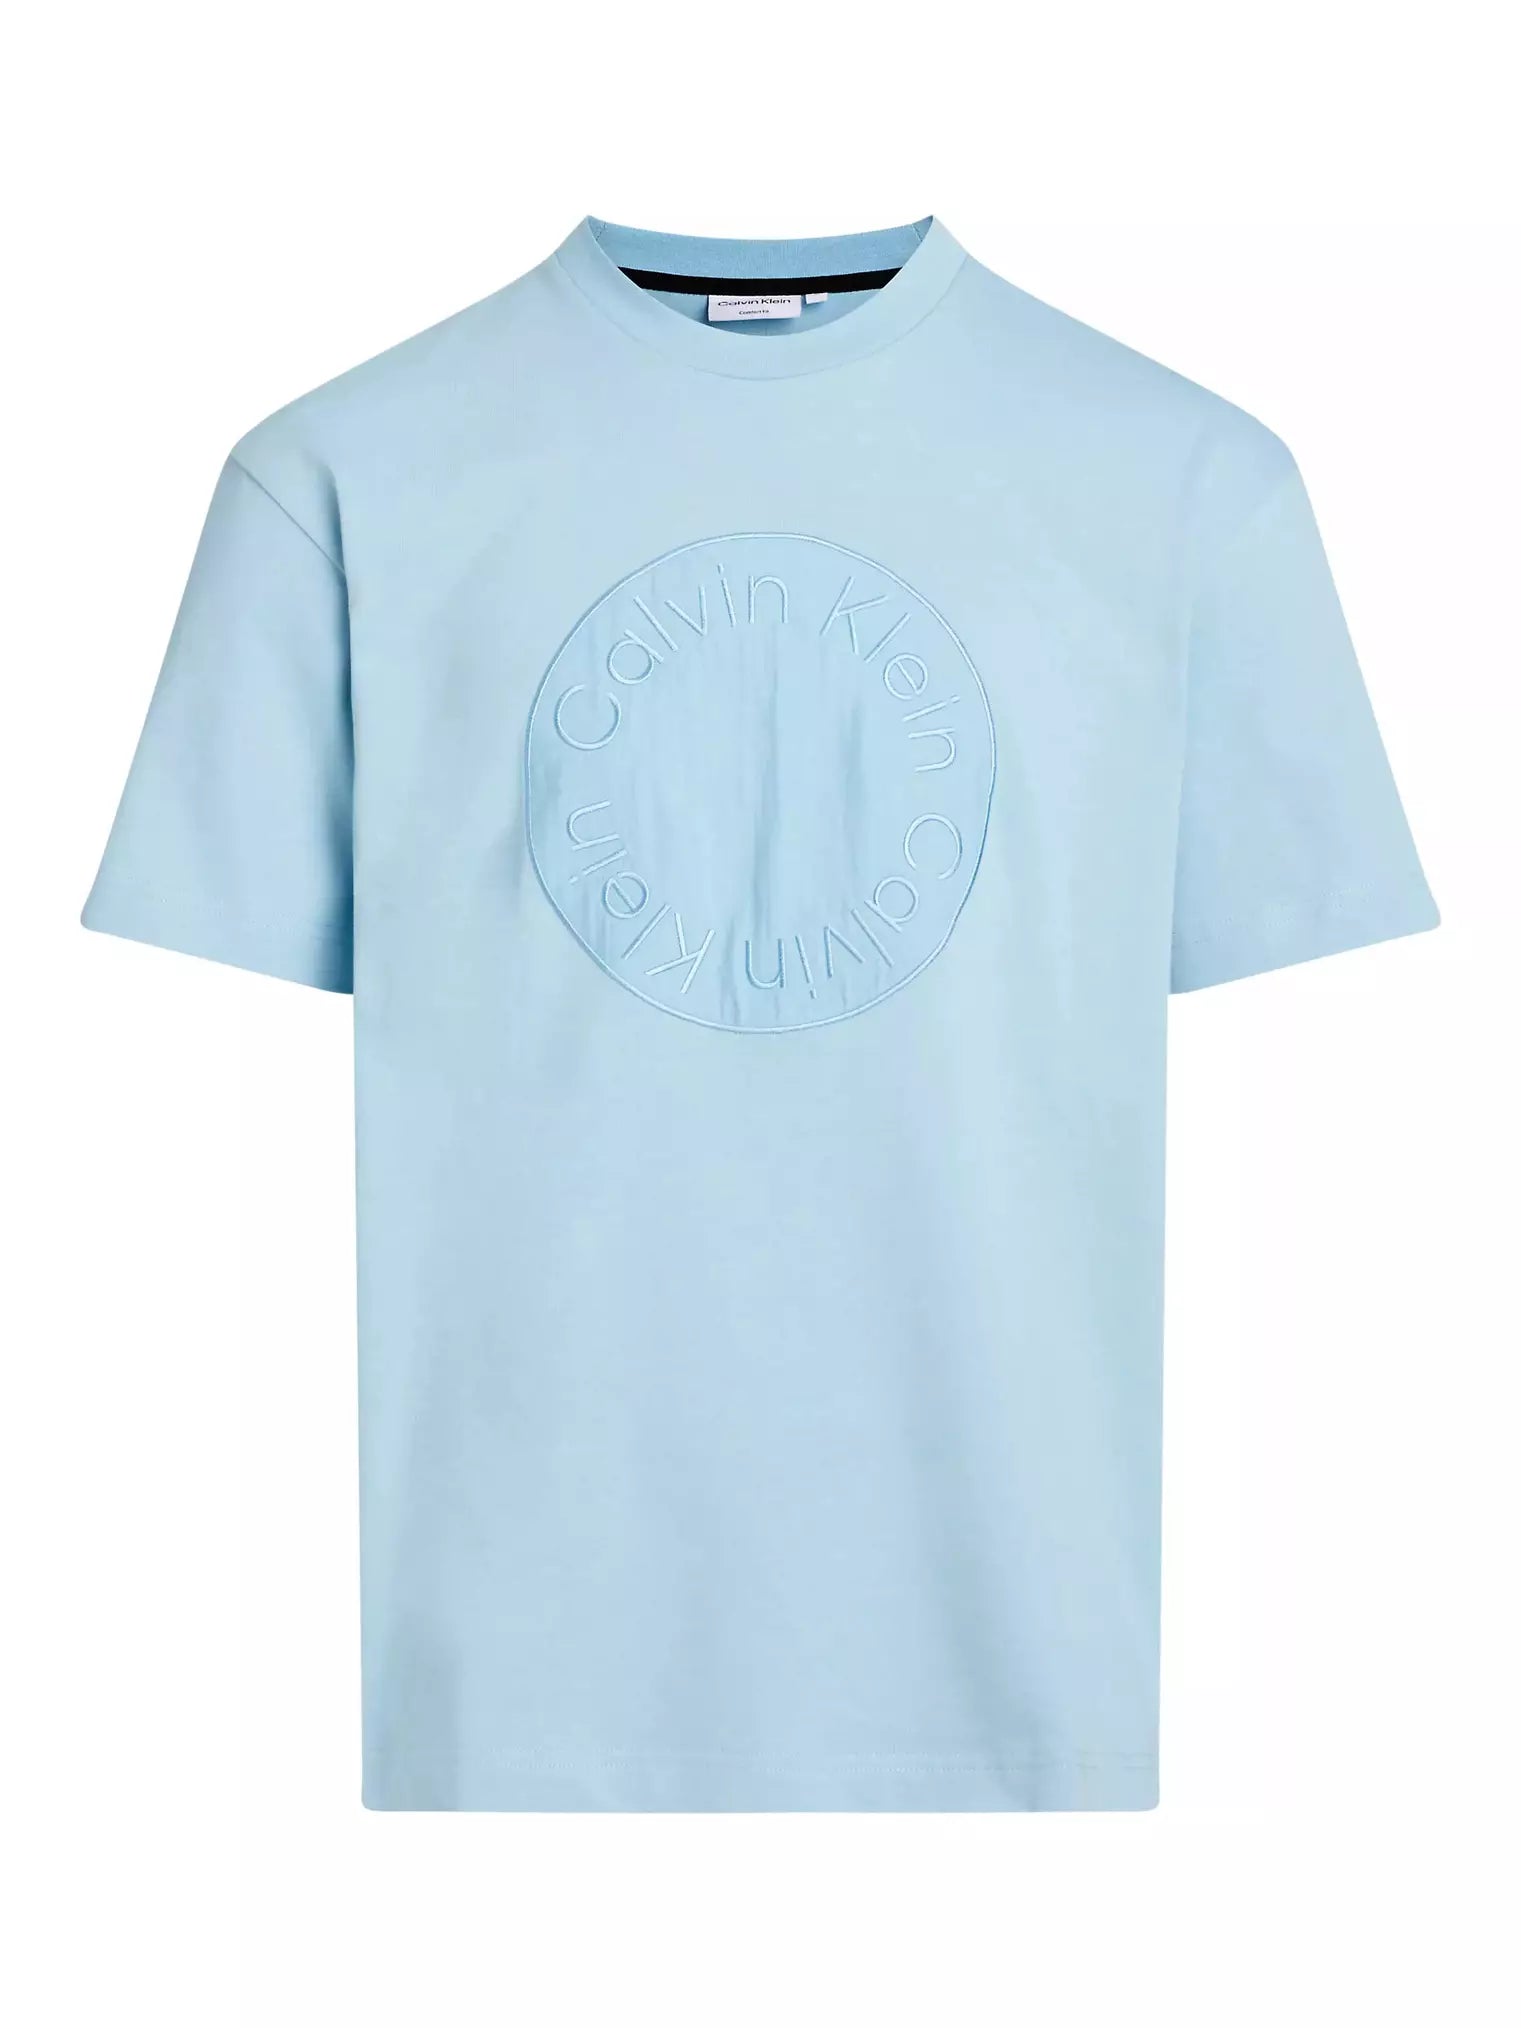 EMBROIDERED EMBLEM T, CW6 Tropic Blue